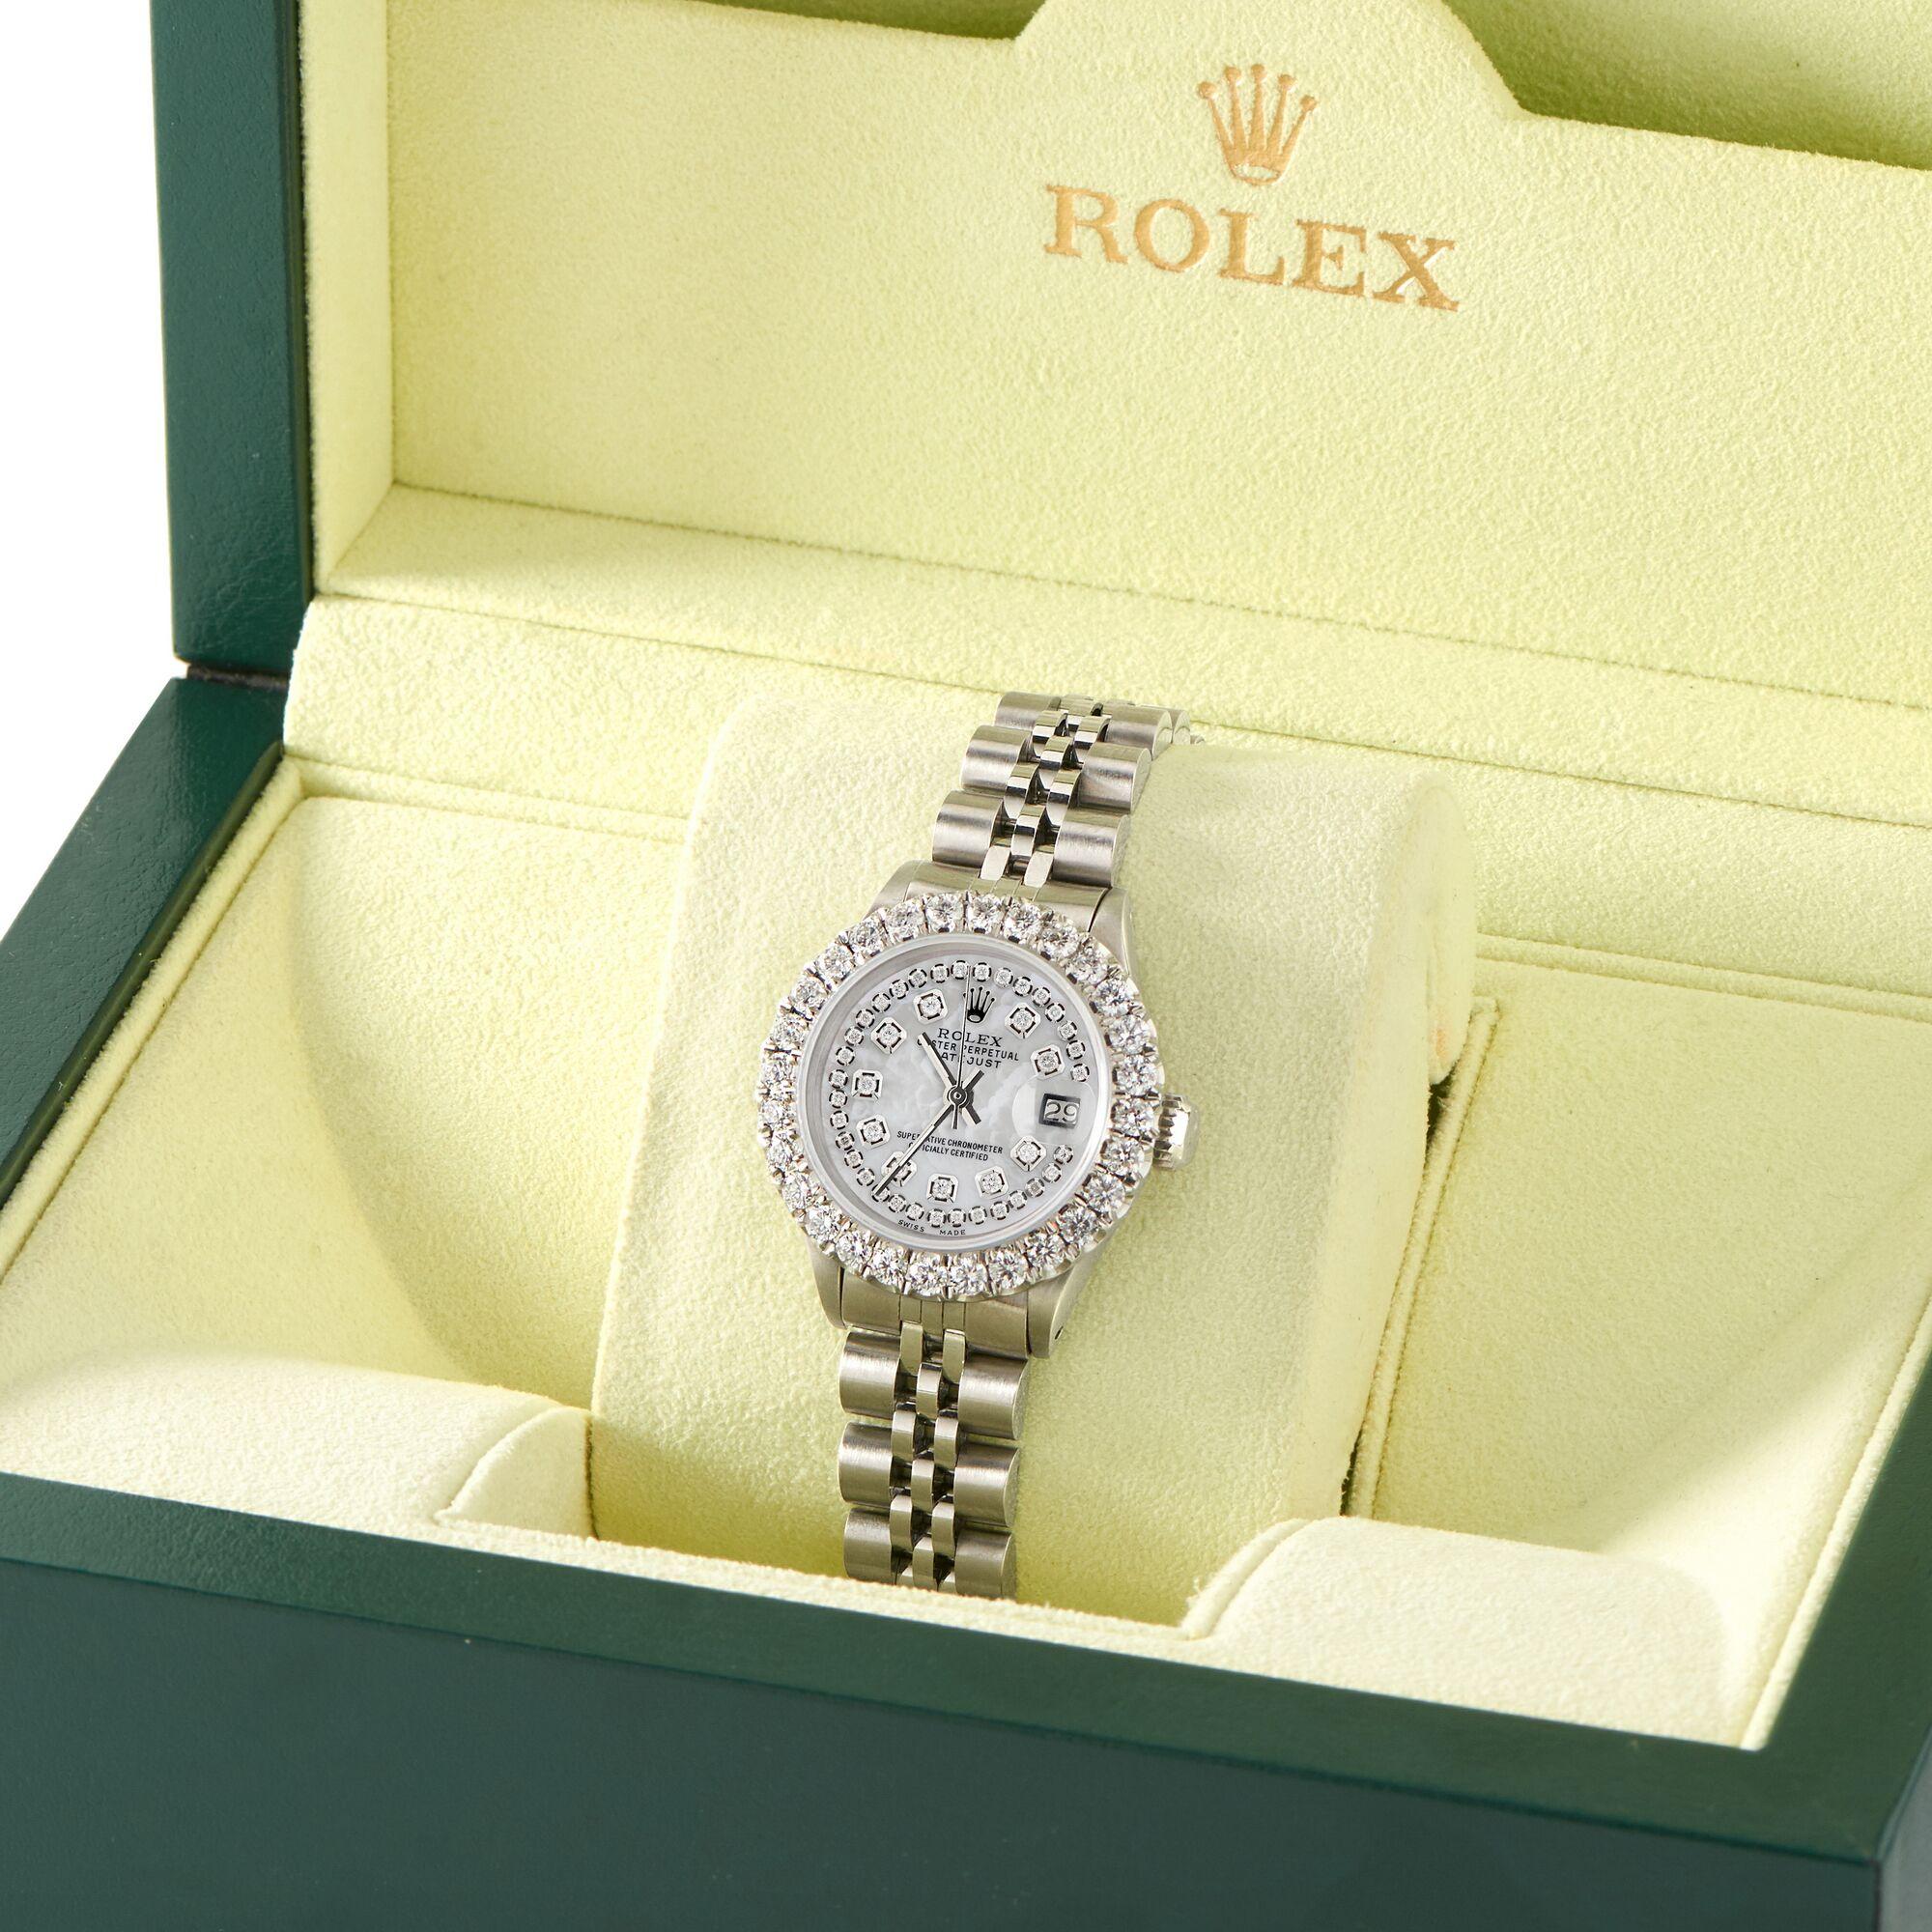 Rolex Datejust Steel Jubilee Watch 2 Carat Diamond Bezel / Royal MOP Dial In Excellent Condition For Sale In New York, NY